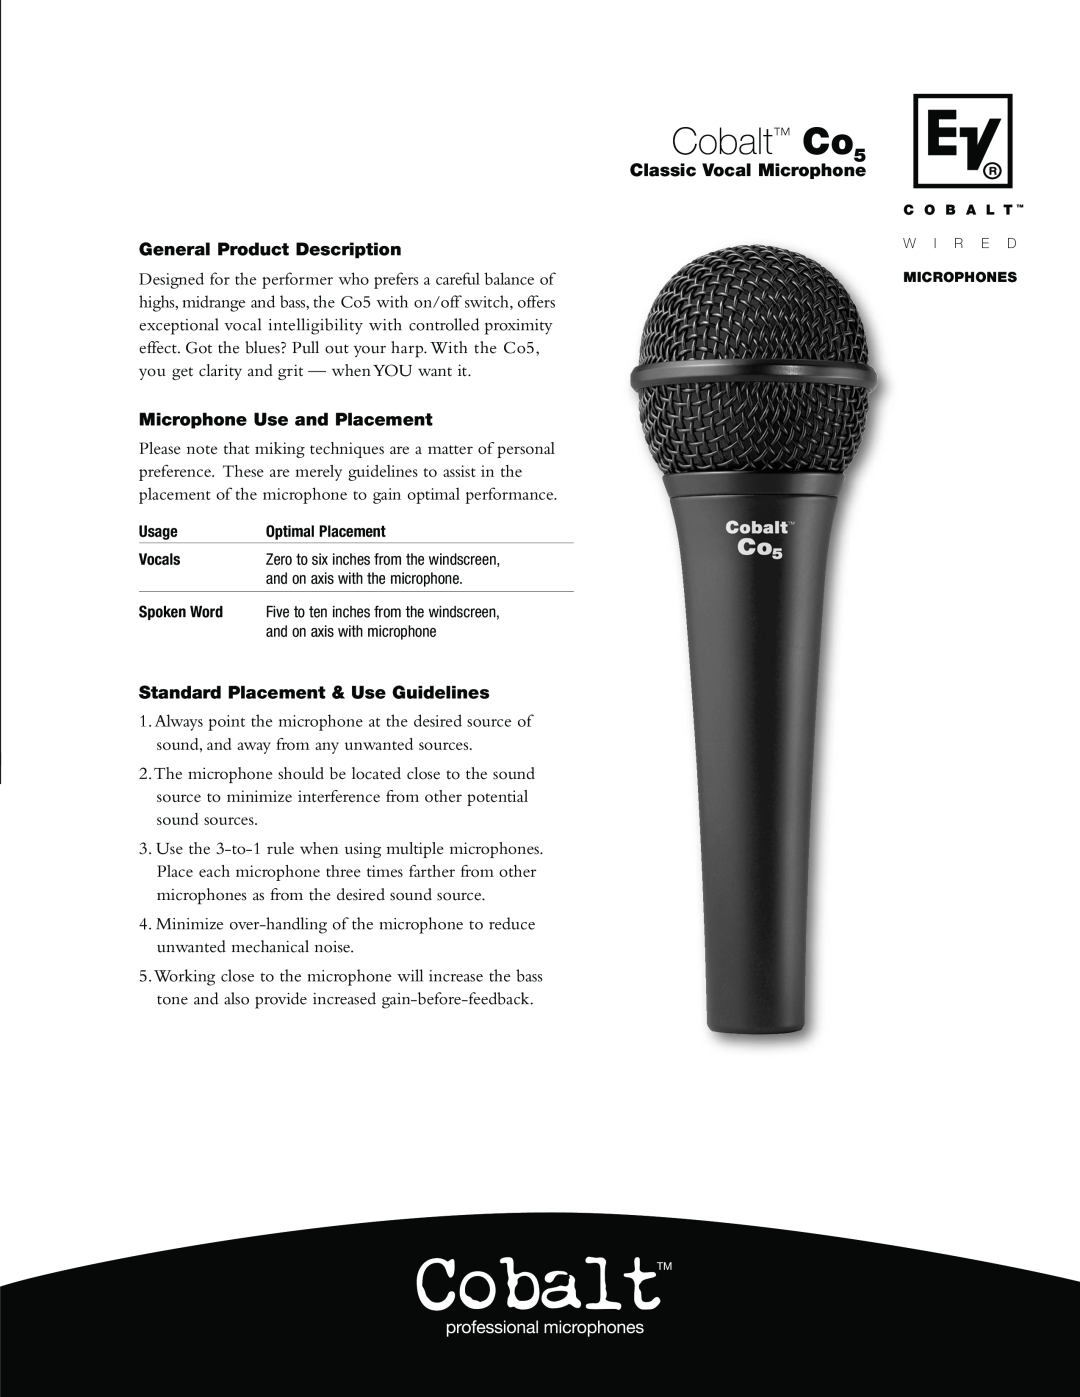 Electro-Voice C05 manual Cobalt Co5, General Product Description, Microphone Use and Placement, Classic Vocal Microphone 